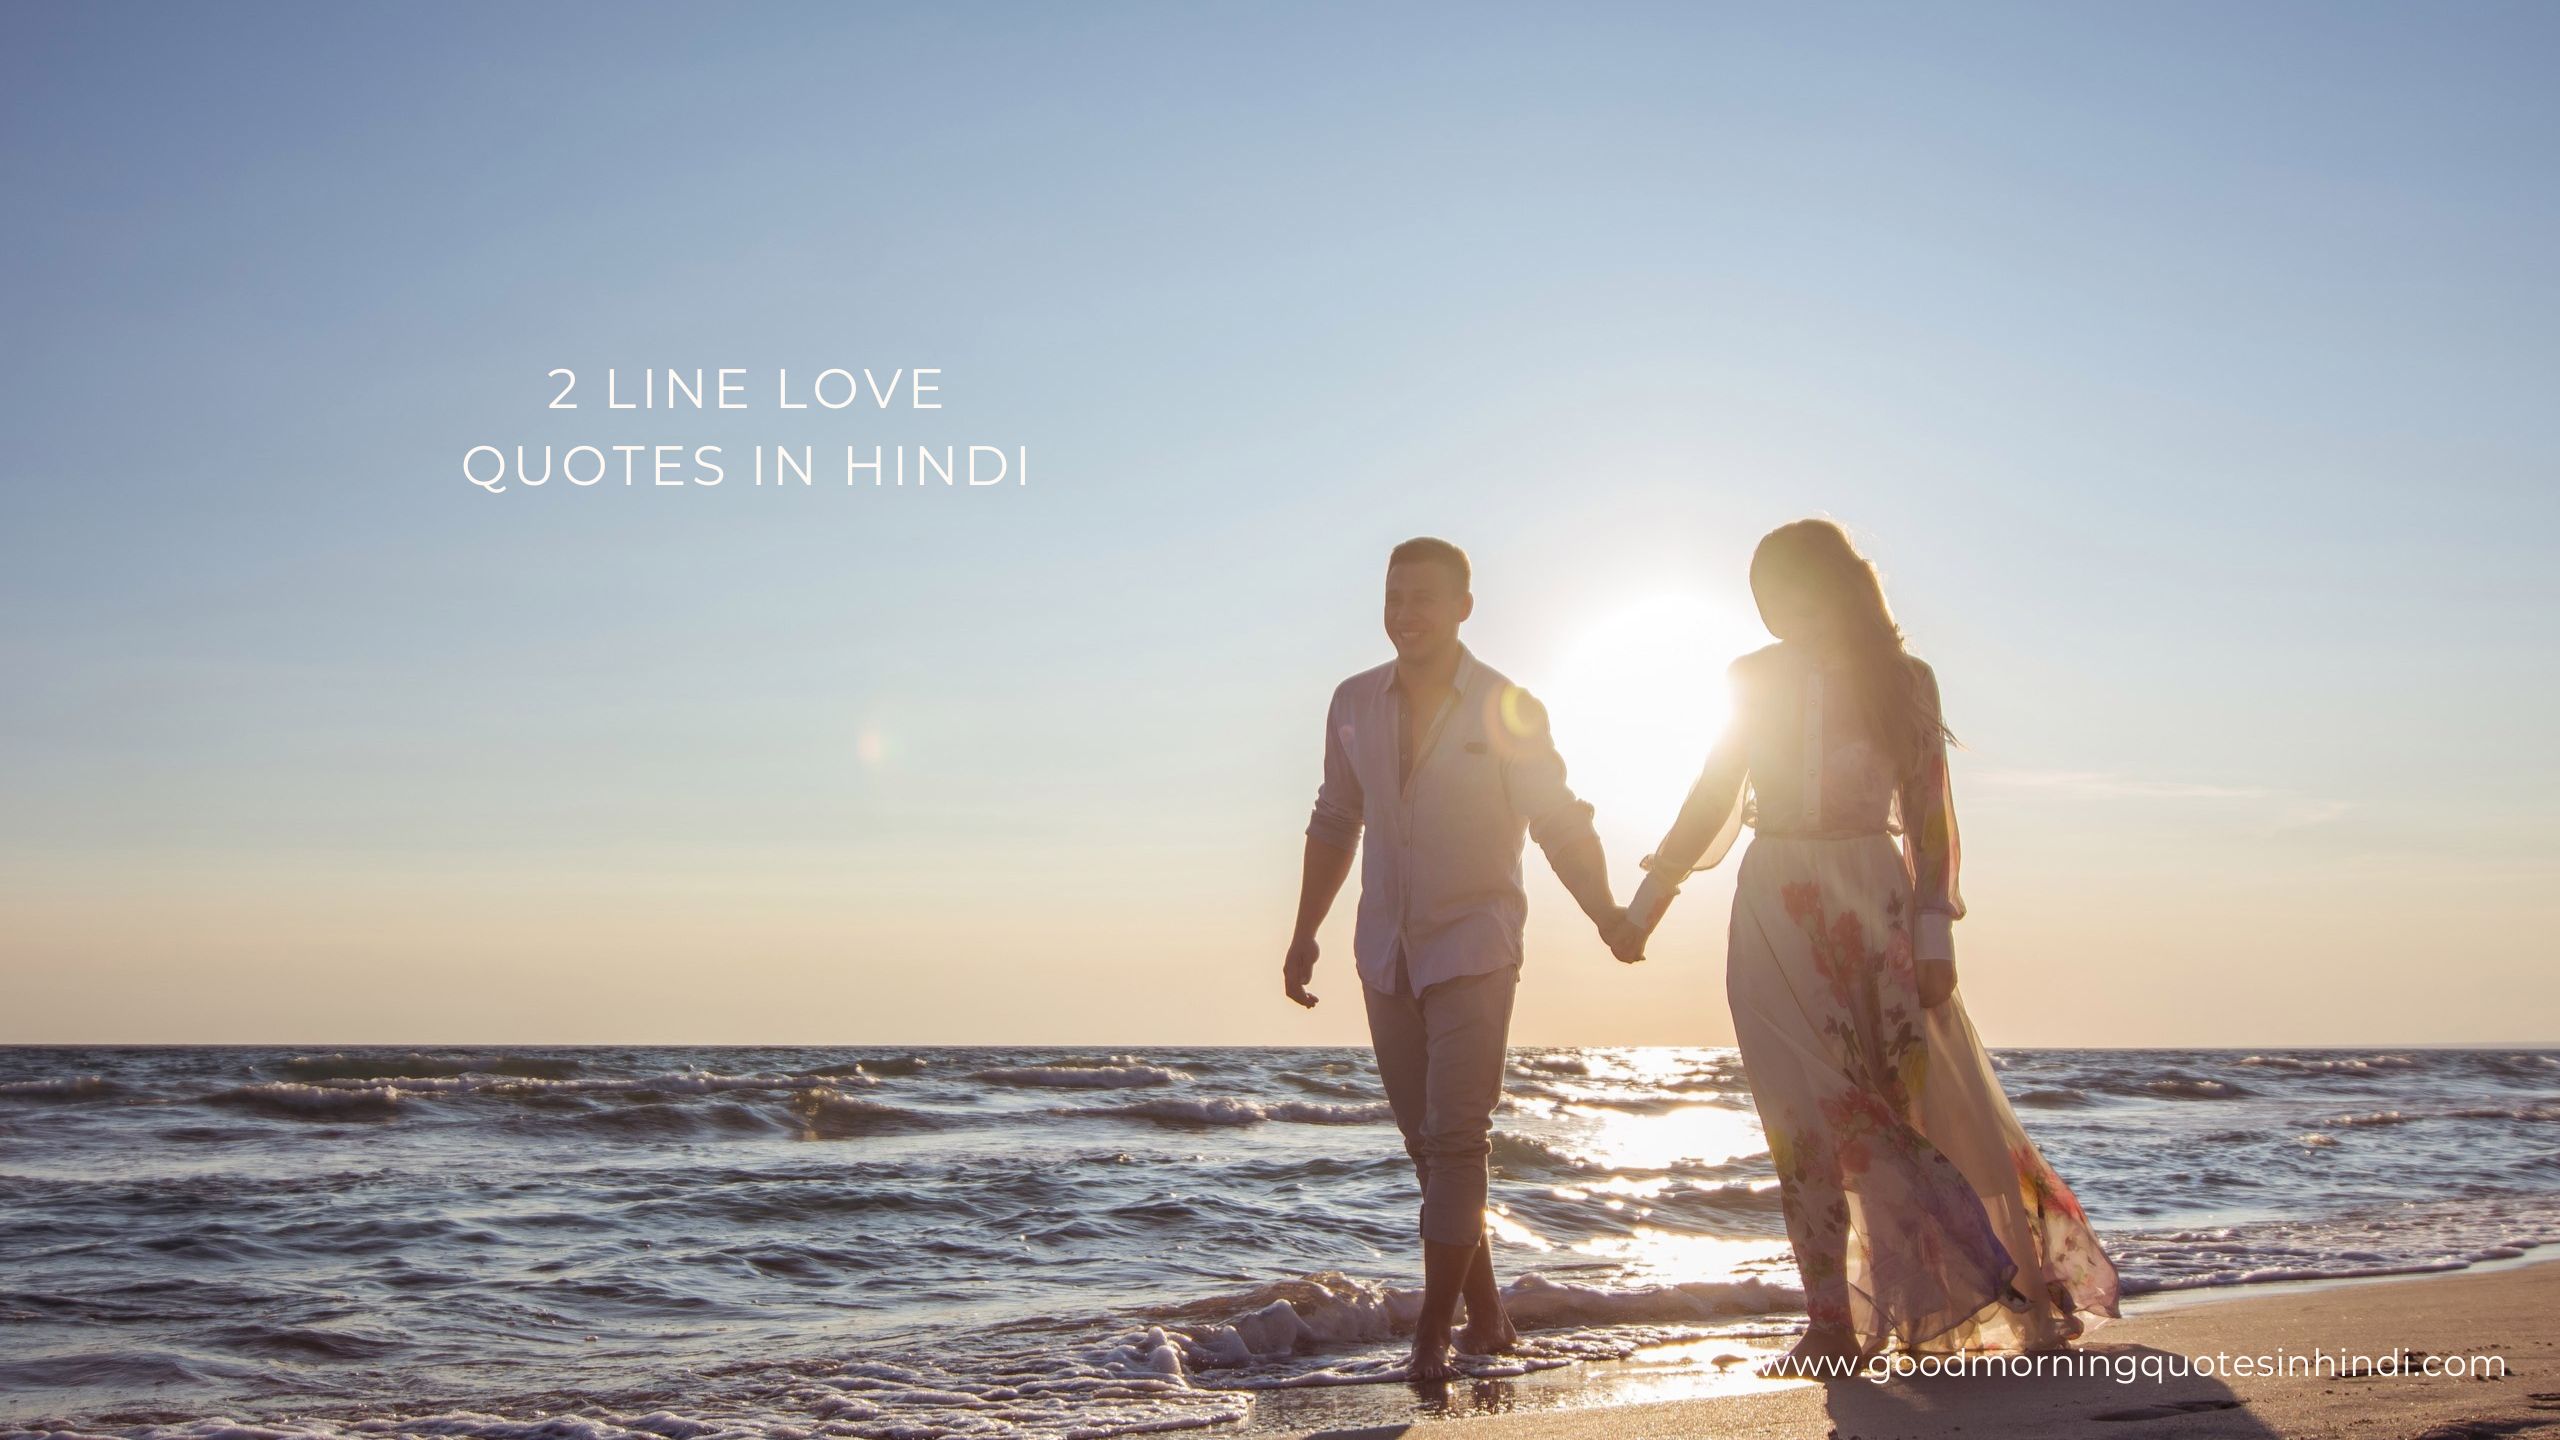 2 line love quotes in hindi